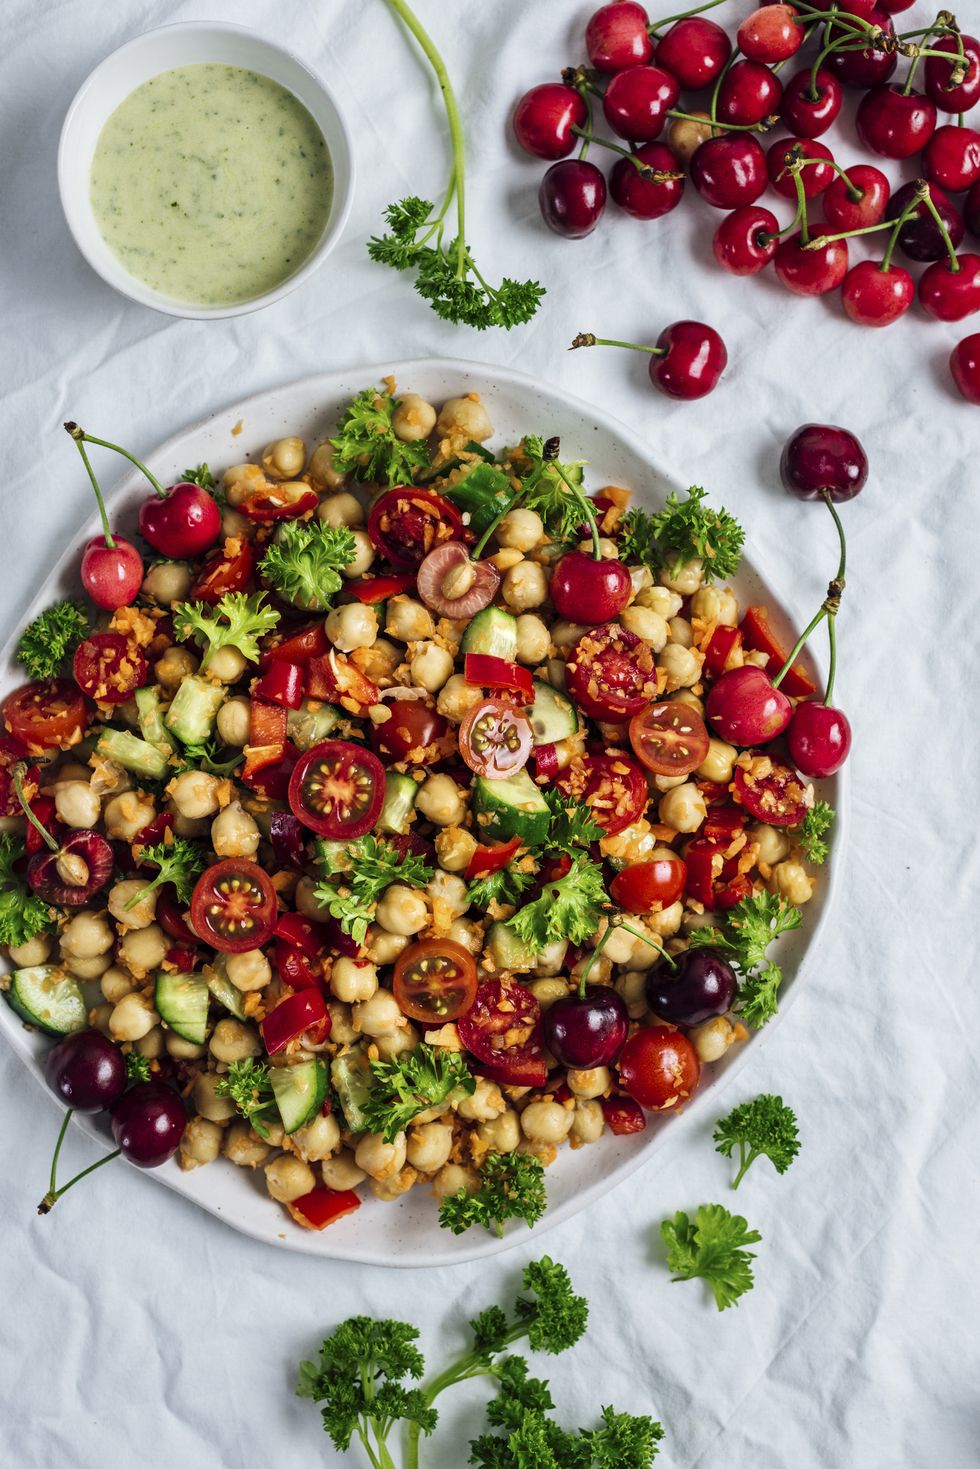 Chickpea salad with shredded carrot,  cucumbers and cherries accompanied with a curry yogurt dressing.